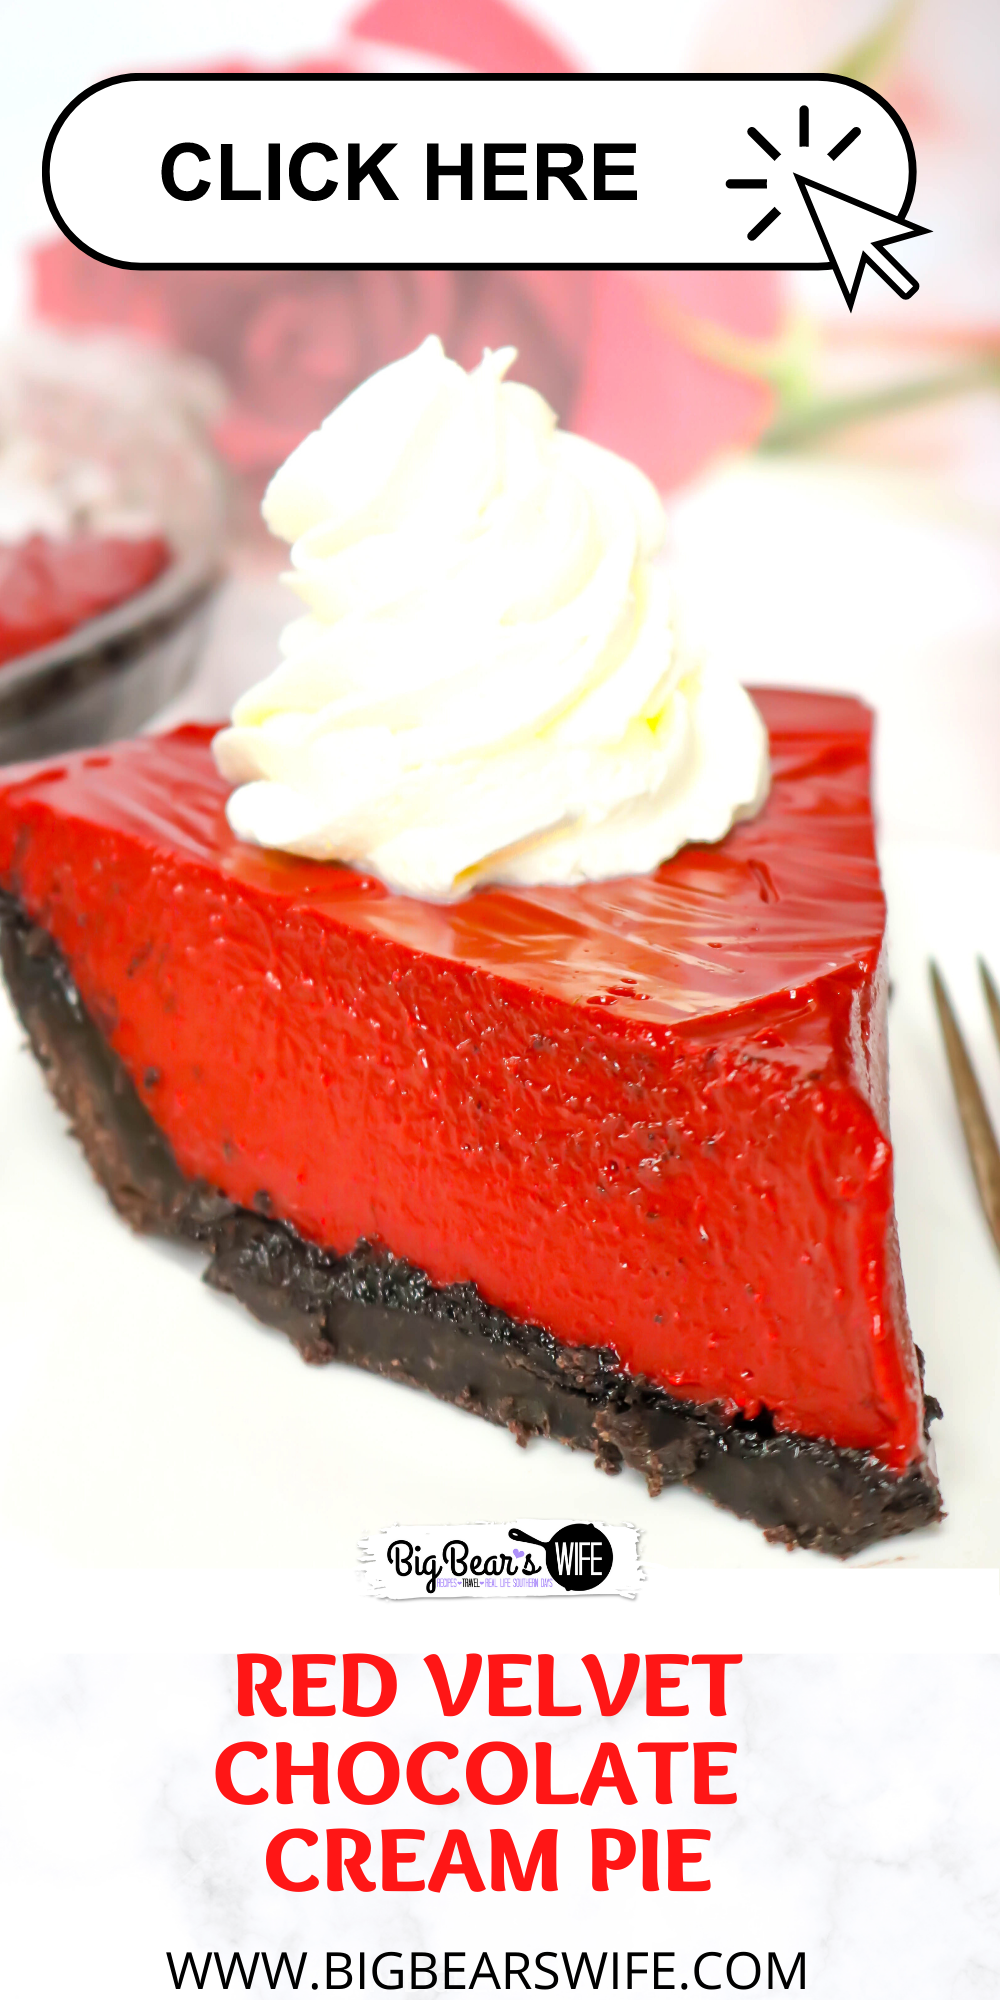 Dive into the classic flavor of red velvet with this homemade Red Velvet Chocolate Cream Pie! This pie has the tangy of red velvet, the silkiness of chocolate pie and a homemade chocolate cookie crust!   via @bigbearswife